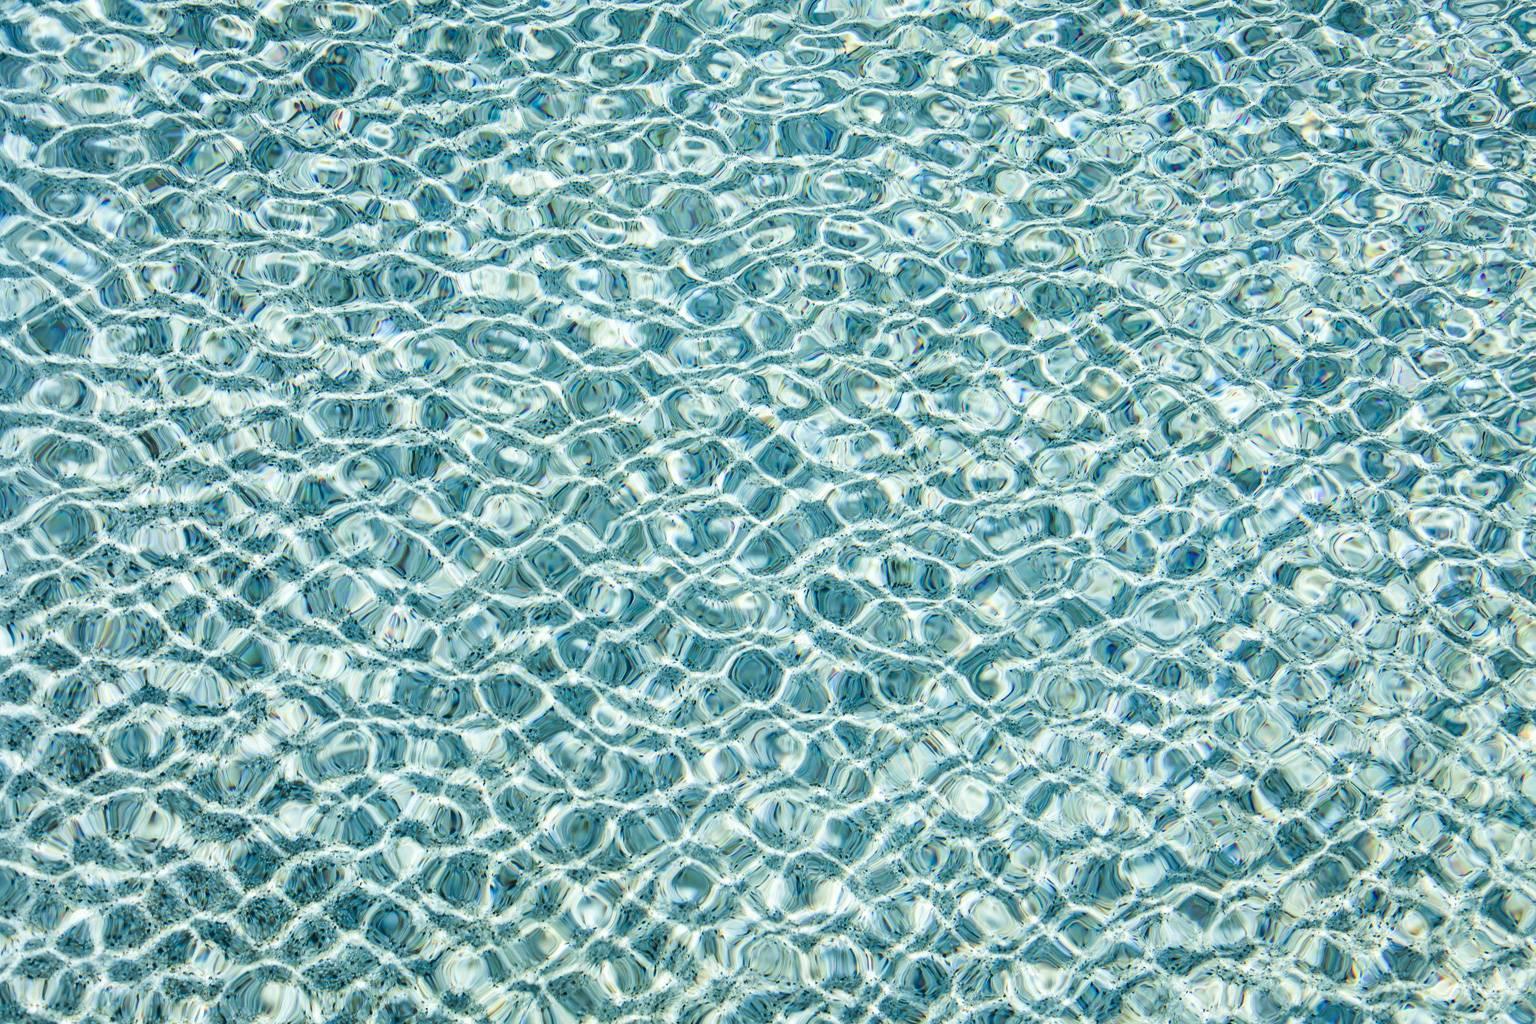 H2O l - large format photograph of sun reflections on pool water surface